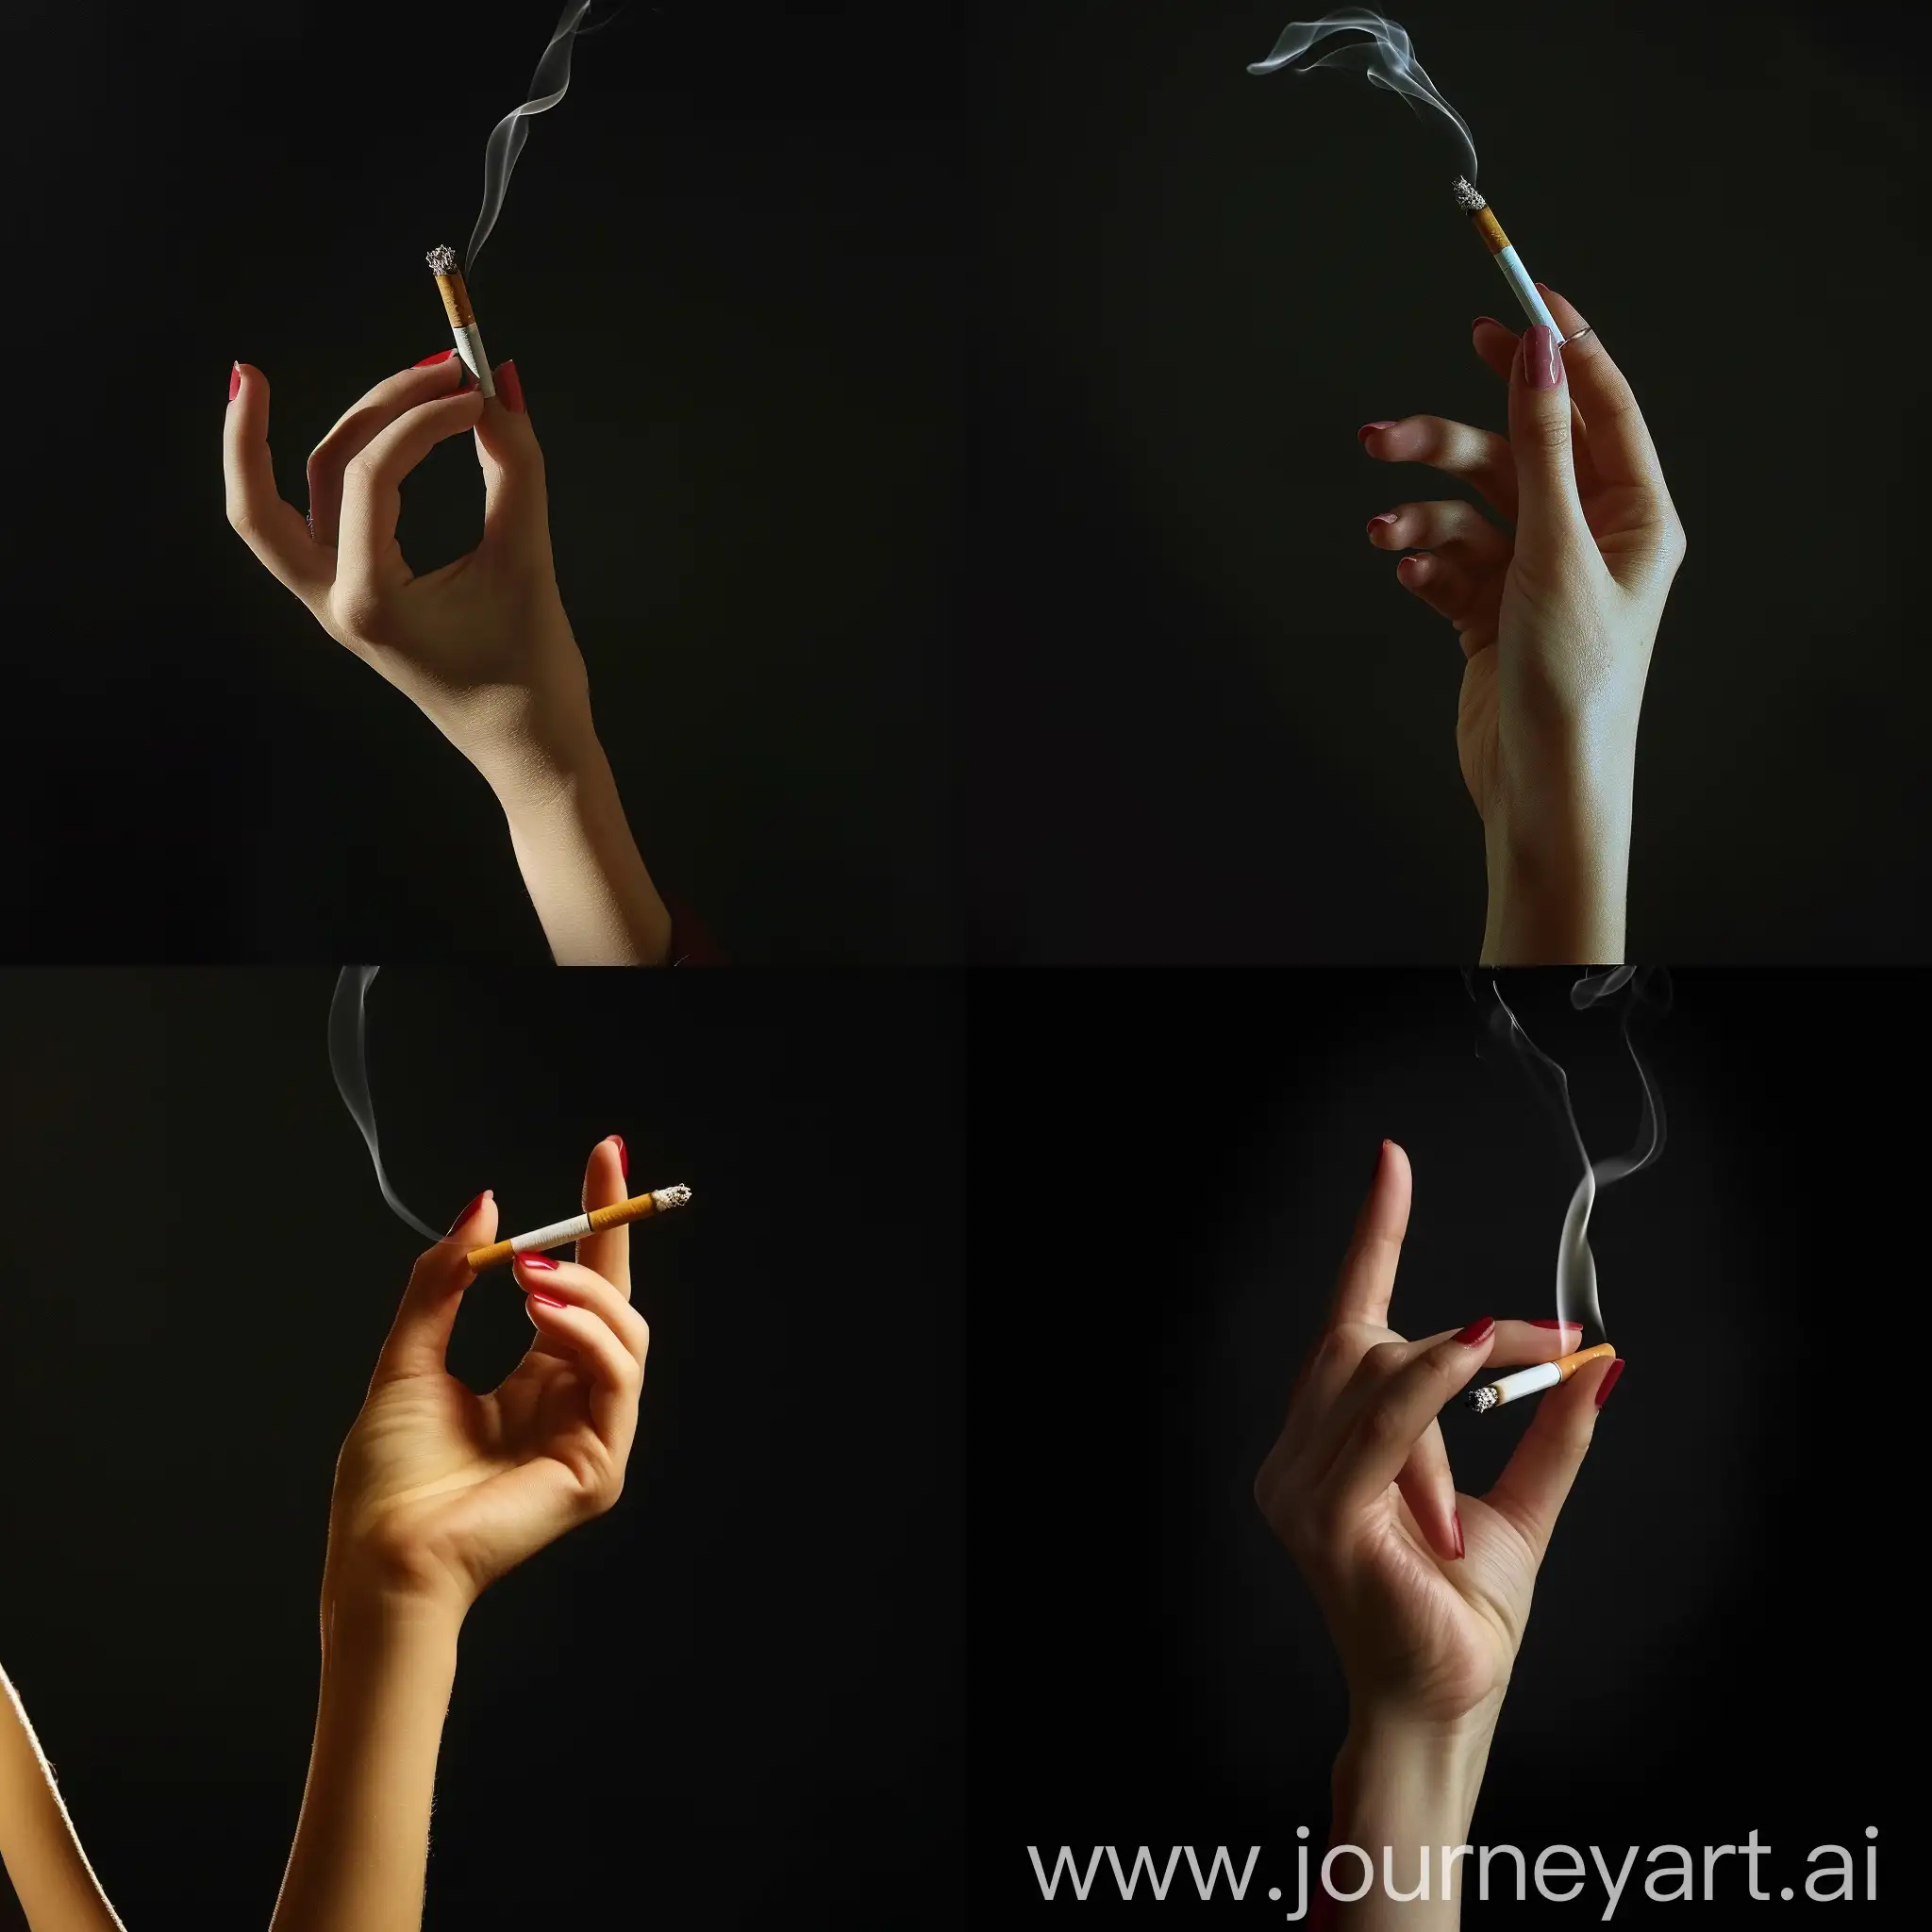 Youth-Smoking-Awareness-A-Solo-Figure-in-Contemplation